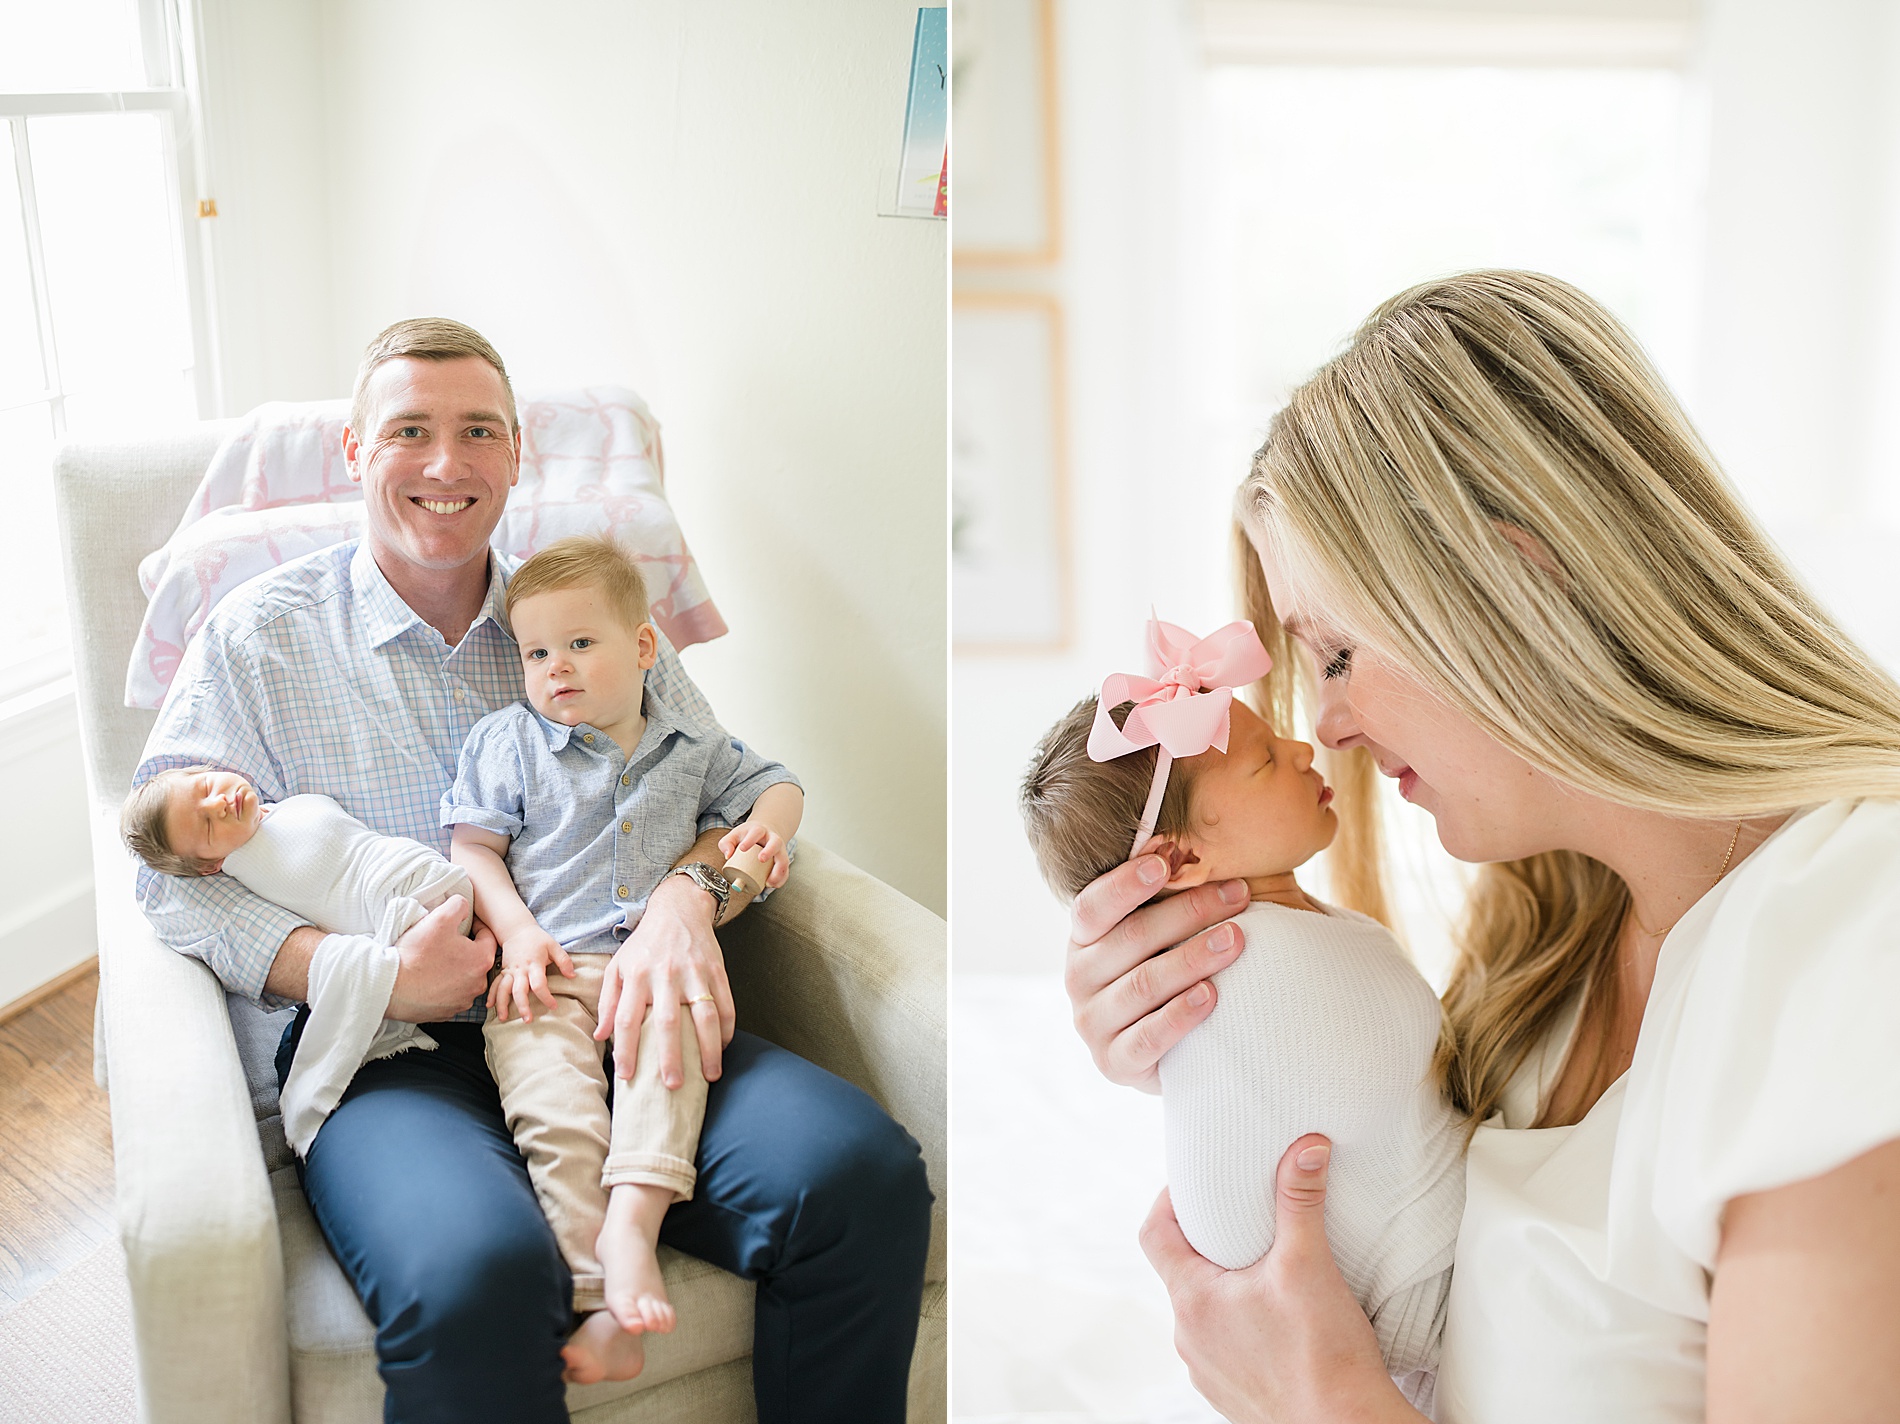 parents hold their newborn baby girl during in-home newborn session photographed by Lindsey Dutton Photography, a Dallas Newborn Photographer 